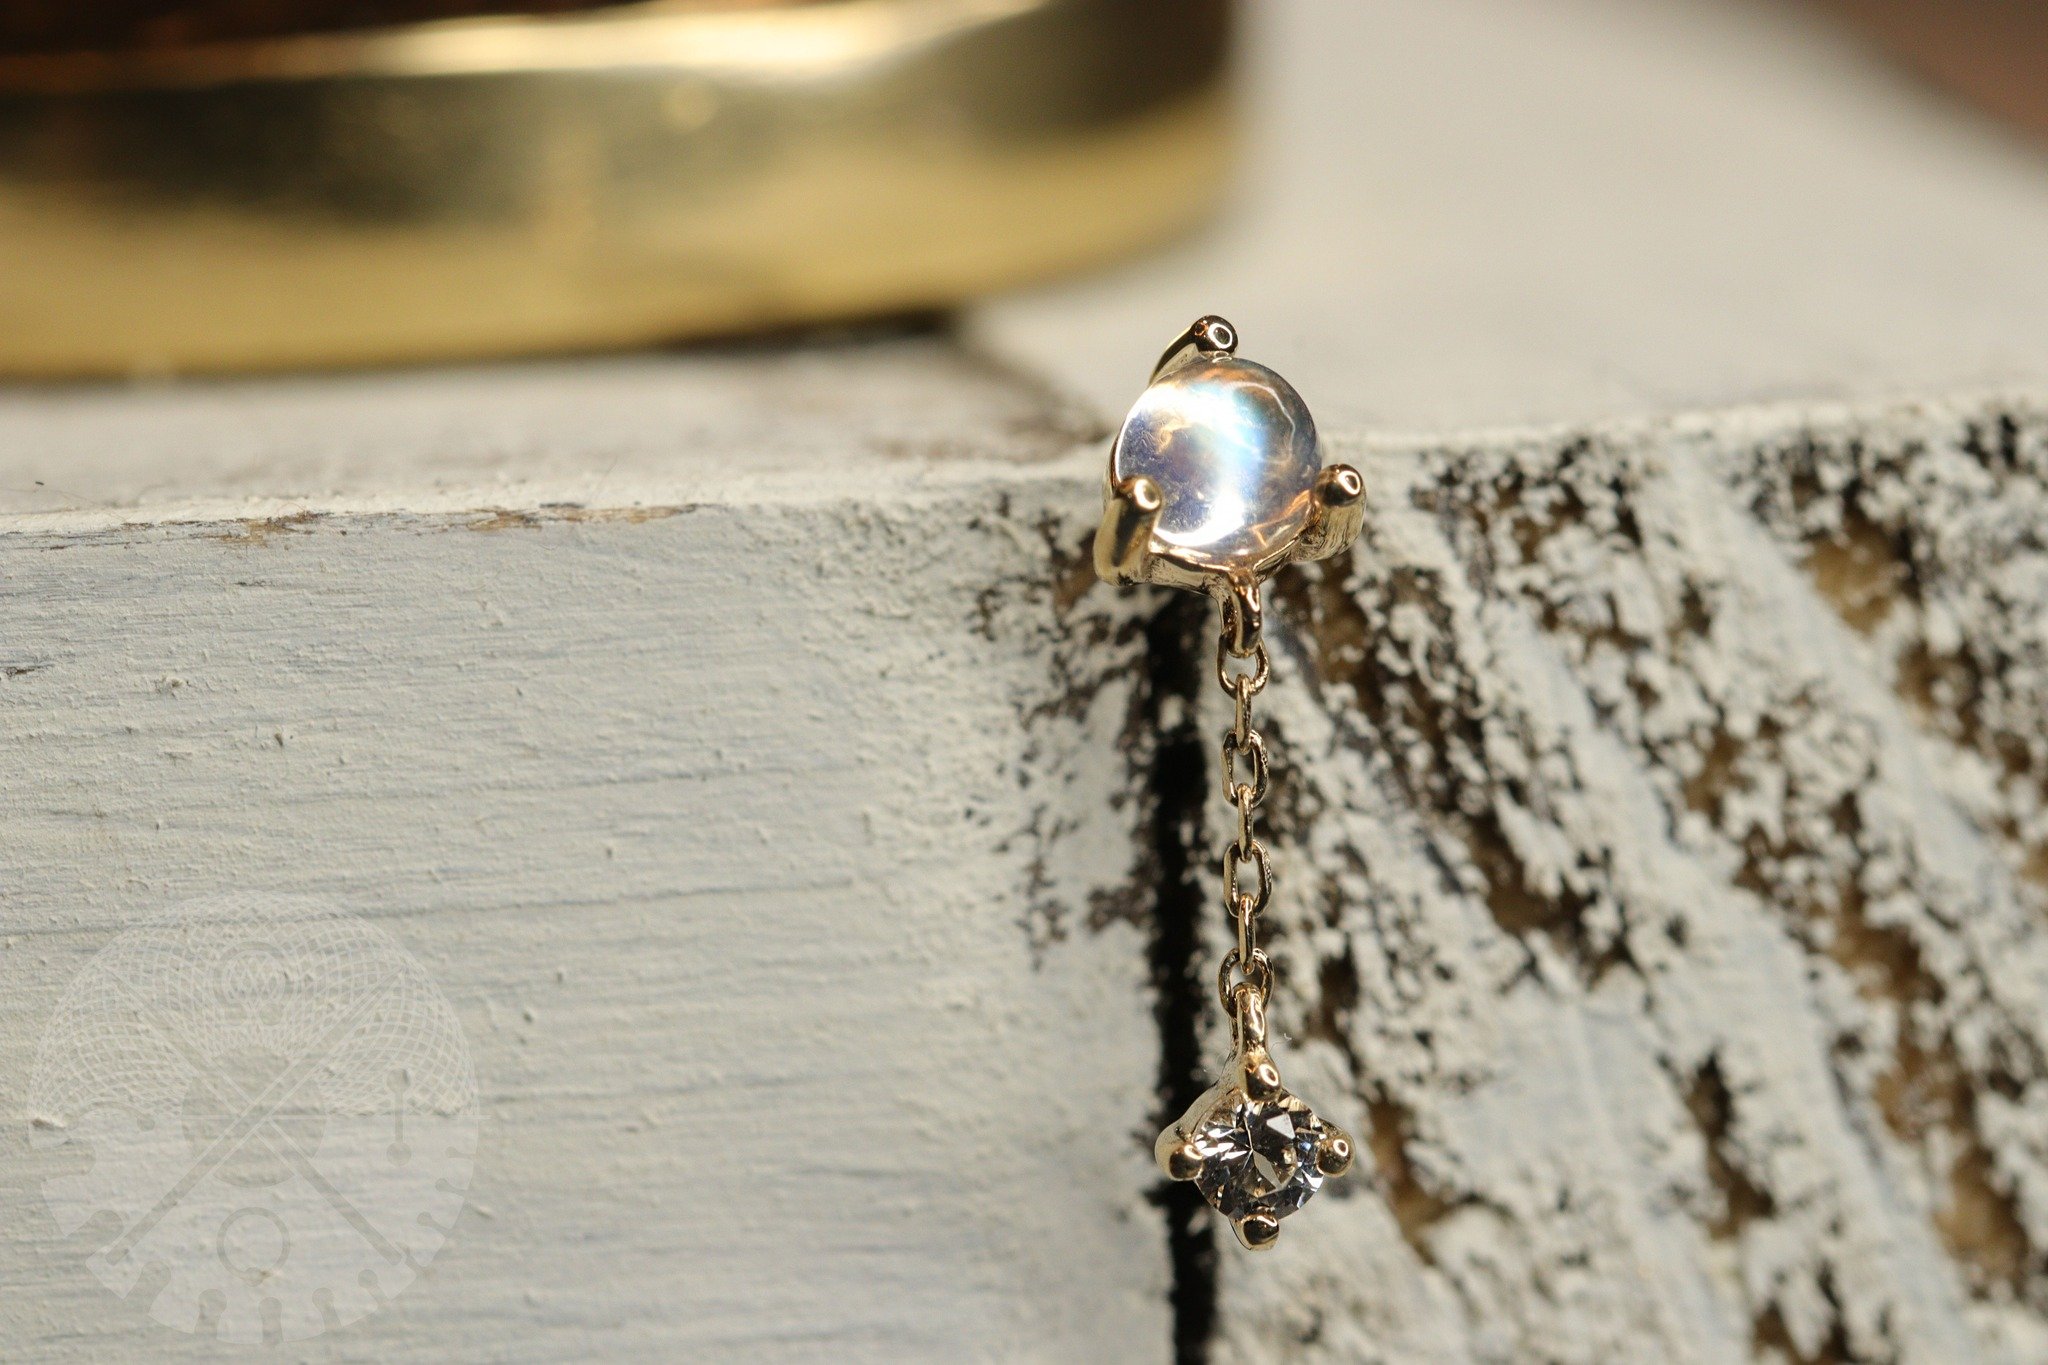 A shop favorite, the Bianca features a genuine Moonstone and White Sapphire and creates an elevated look adding movement in with its dangling charm. 

Good Life is appointment only for all services, consultations and even just to browse our jewelry s